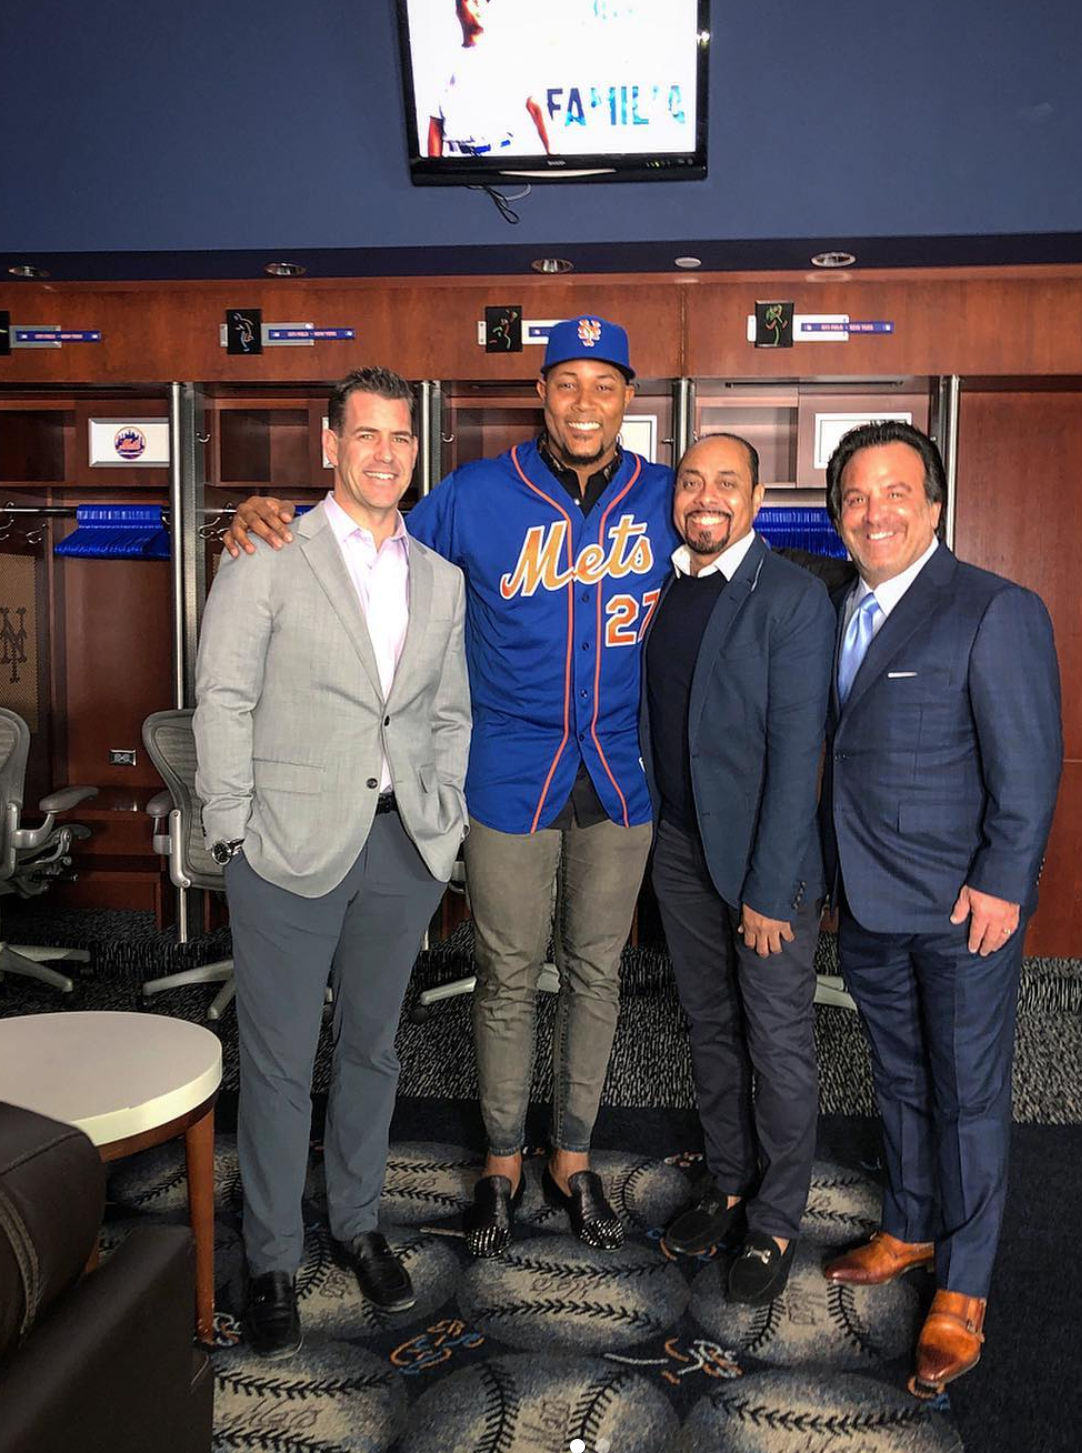 Mets General Manager Brodie Van Wagenen joined Jeurys Familia along with ACES Baseball Agent Sam Levinson and ACES Baseball Agent Joel Ramirez